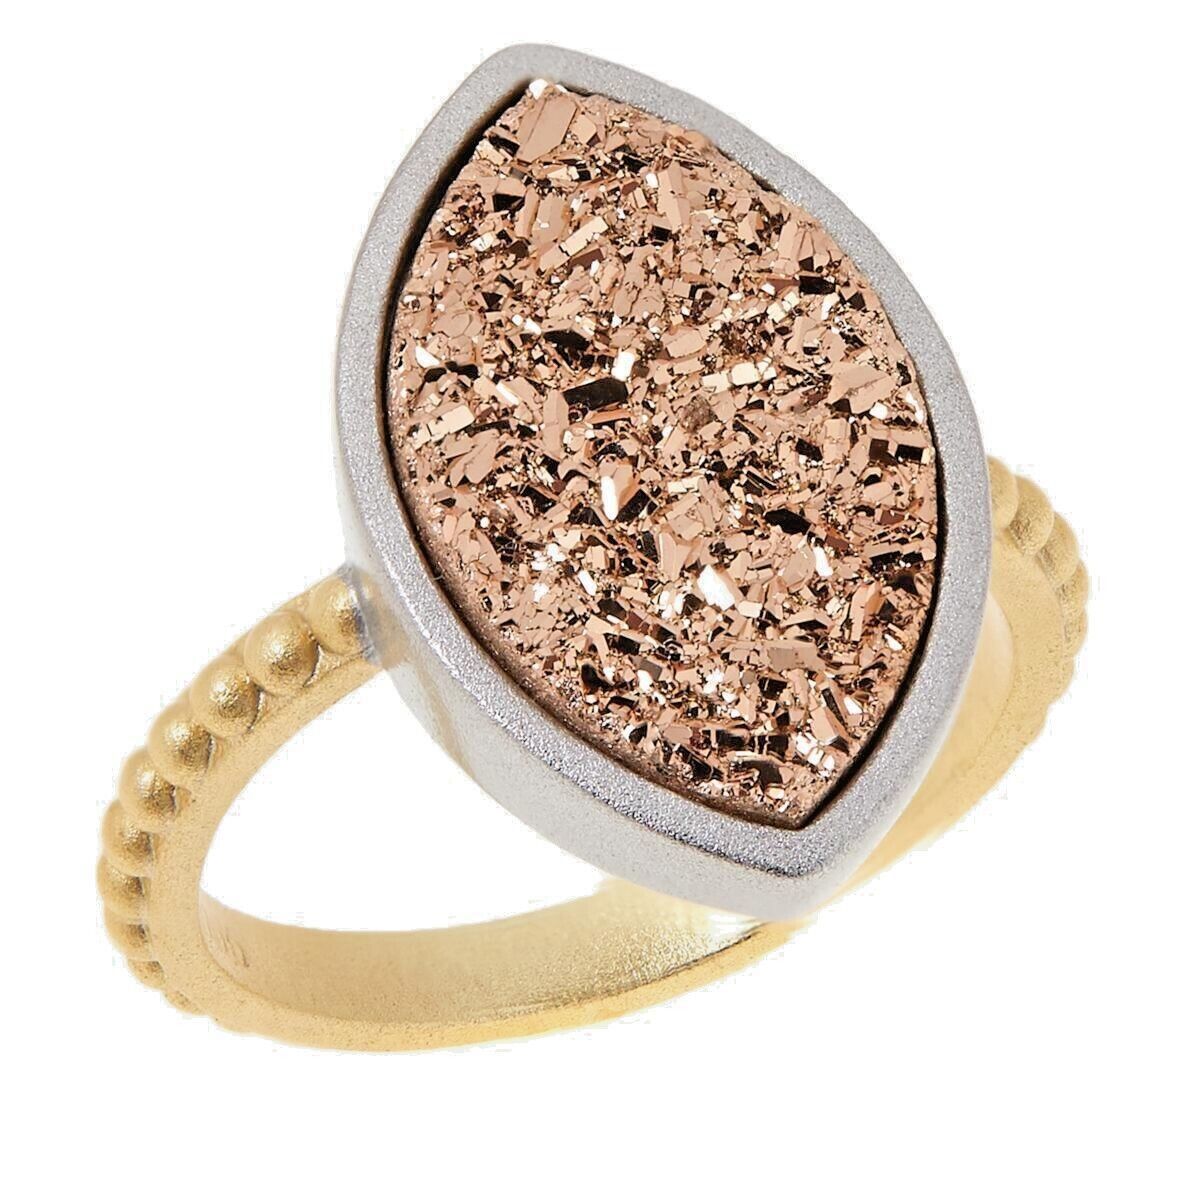 Natalie Wood Designs "She's a Gem" Two-tone Drusy Ring. Size 7